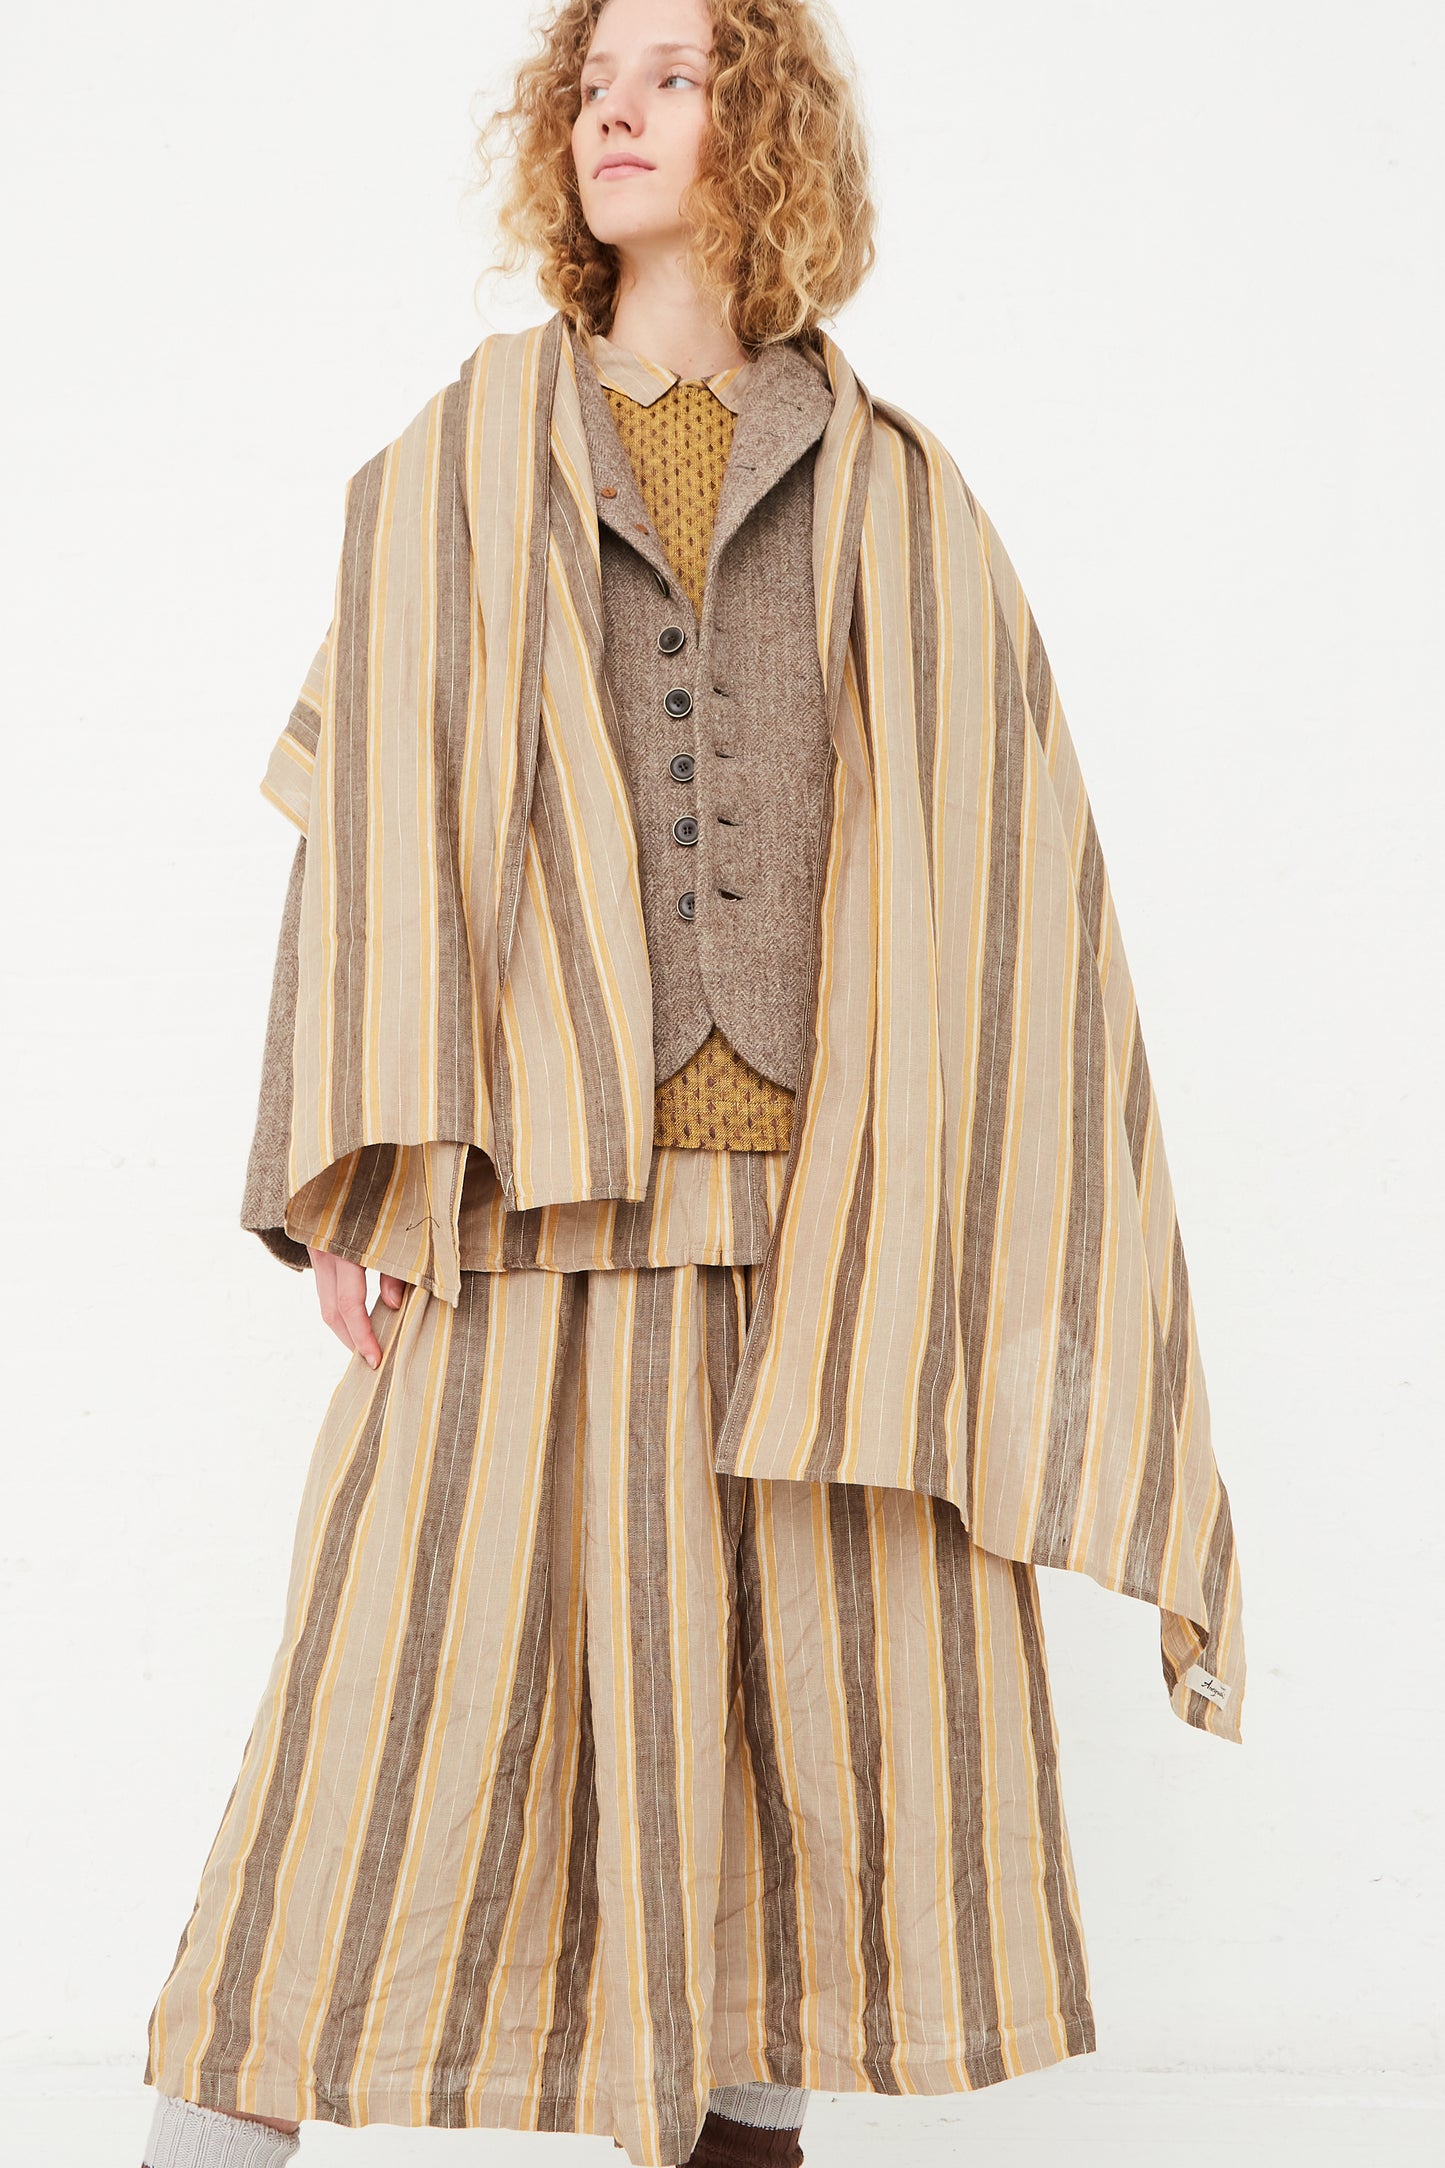 A model wearing an Ichi Antiquités Linen Stripe Stole in Mustard coat, available at Oroboro store in NYC.